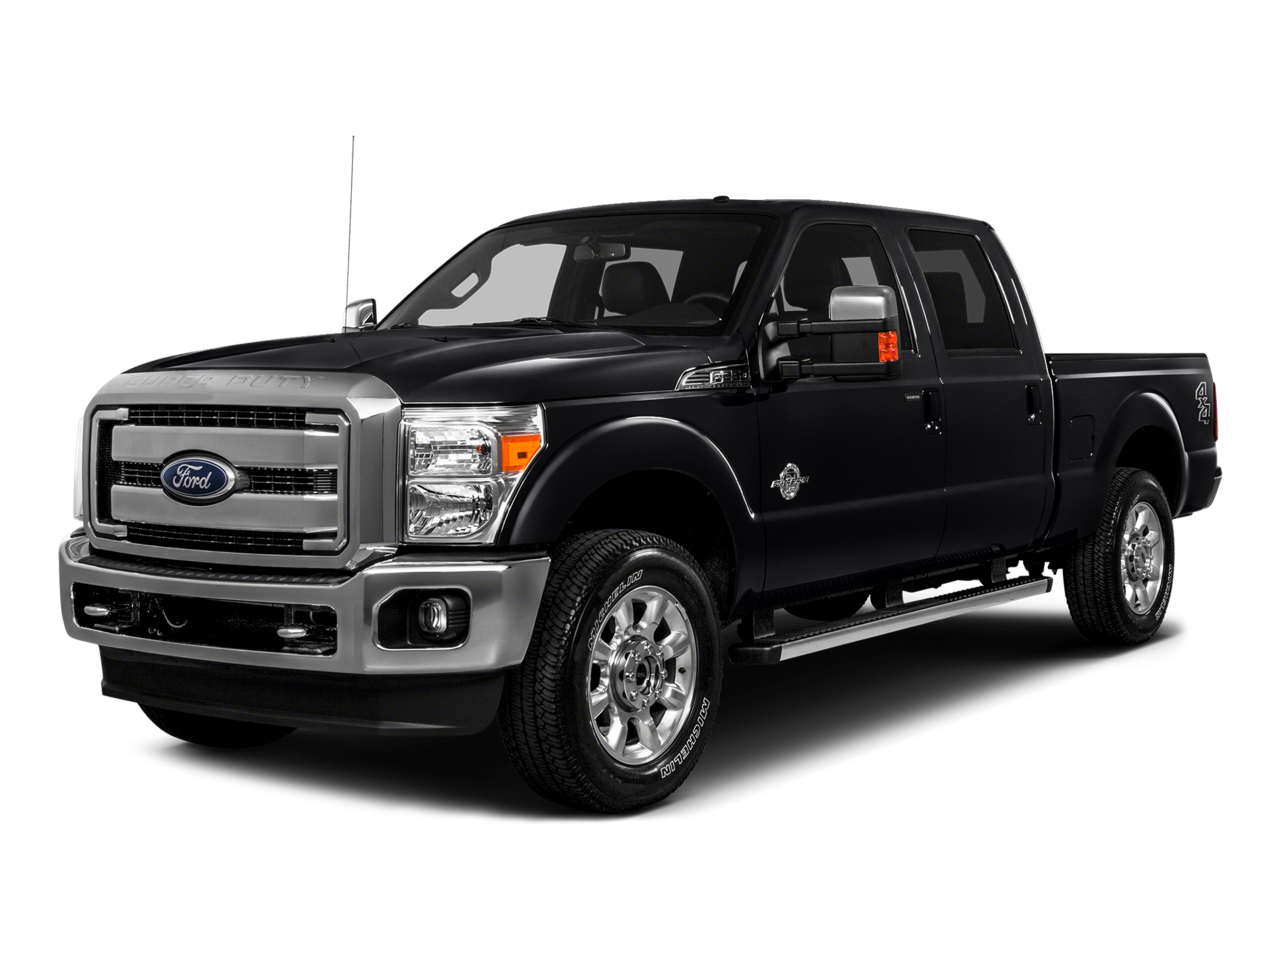 2016 Ford F-250 Super Duty Repair: Service and Maintenance Cost